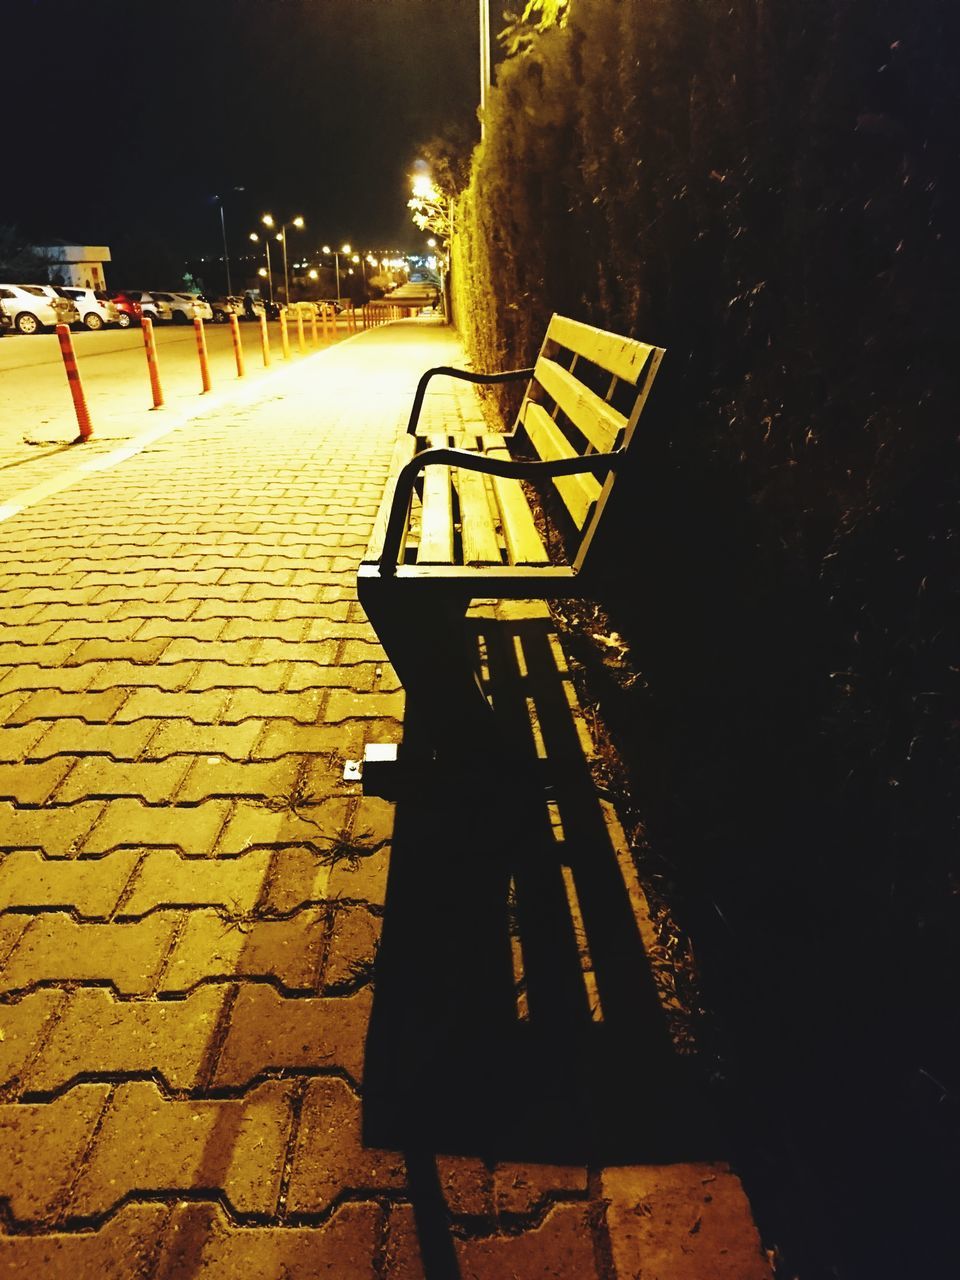 EMPTY BENCH IN PARK DURING NIGHT